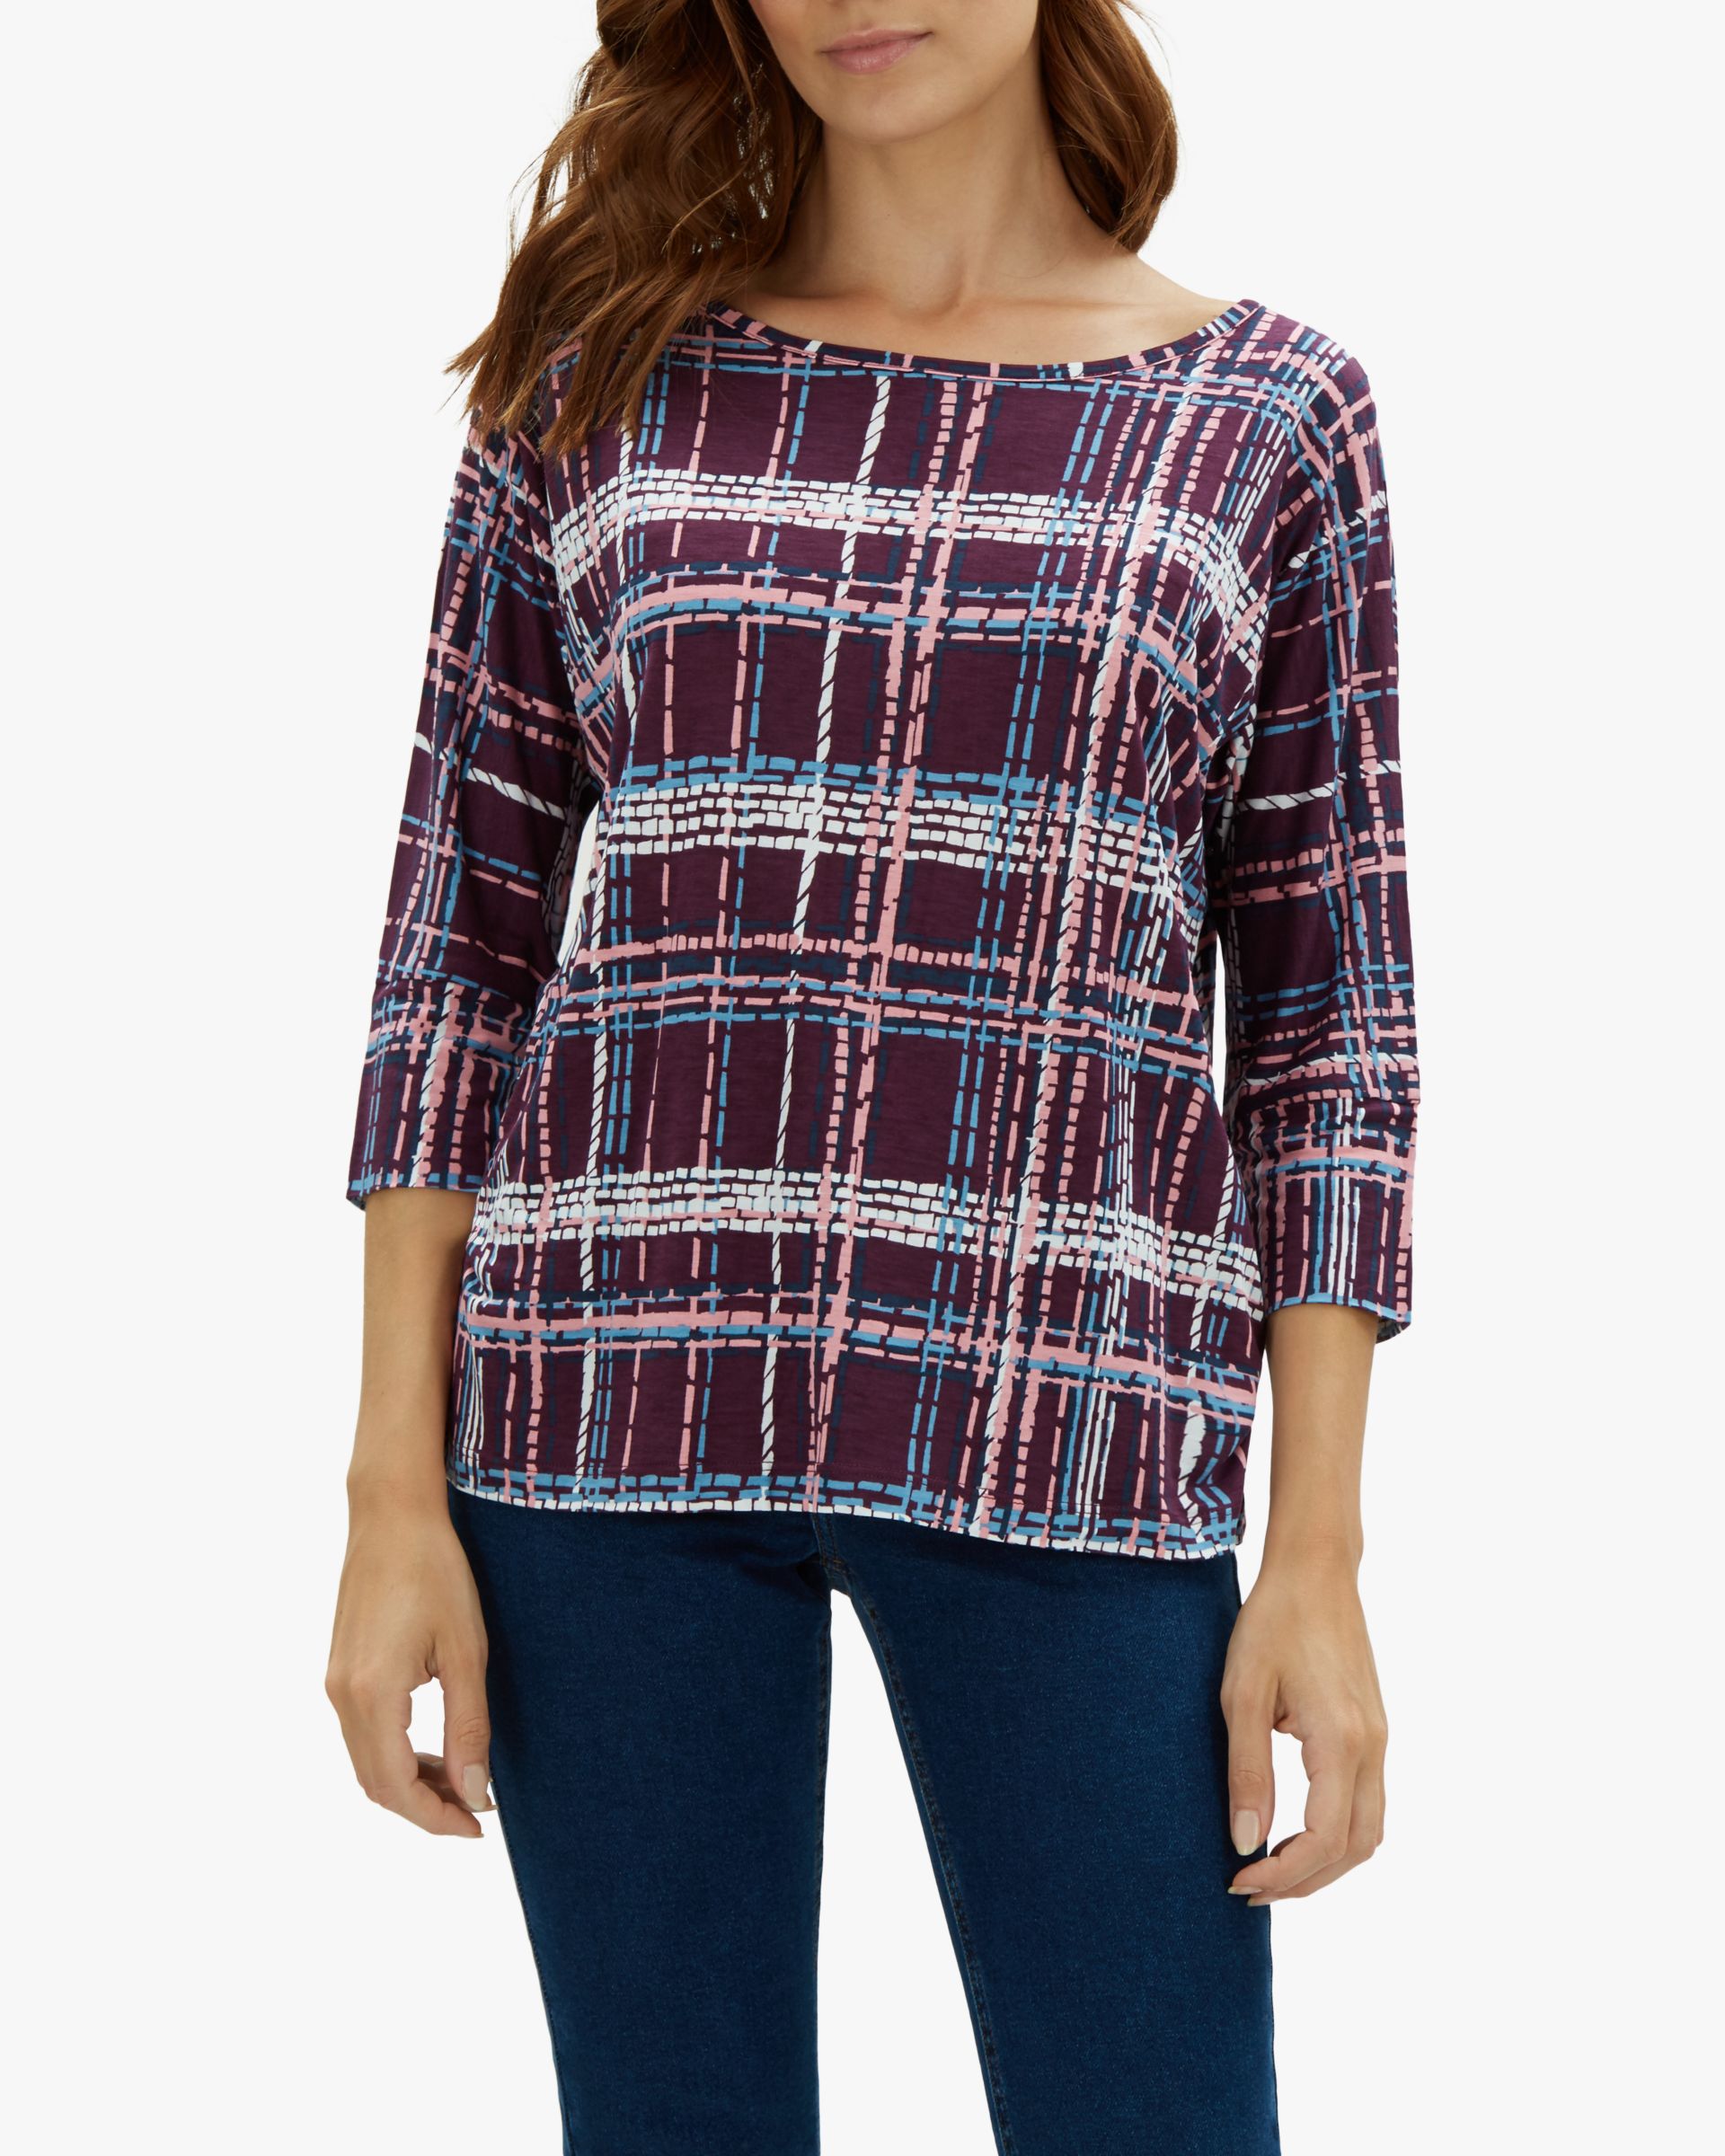 Jaeger Graphic Check Batwing Sleeve Jersey Top, Plum